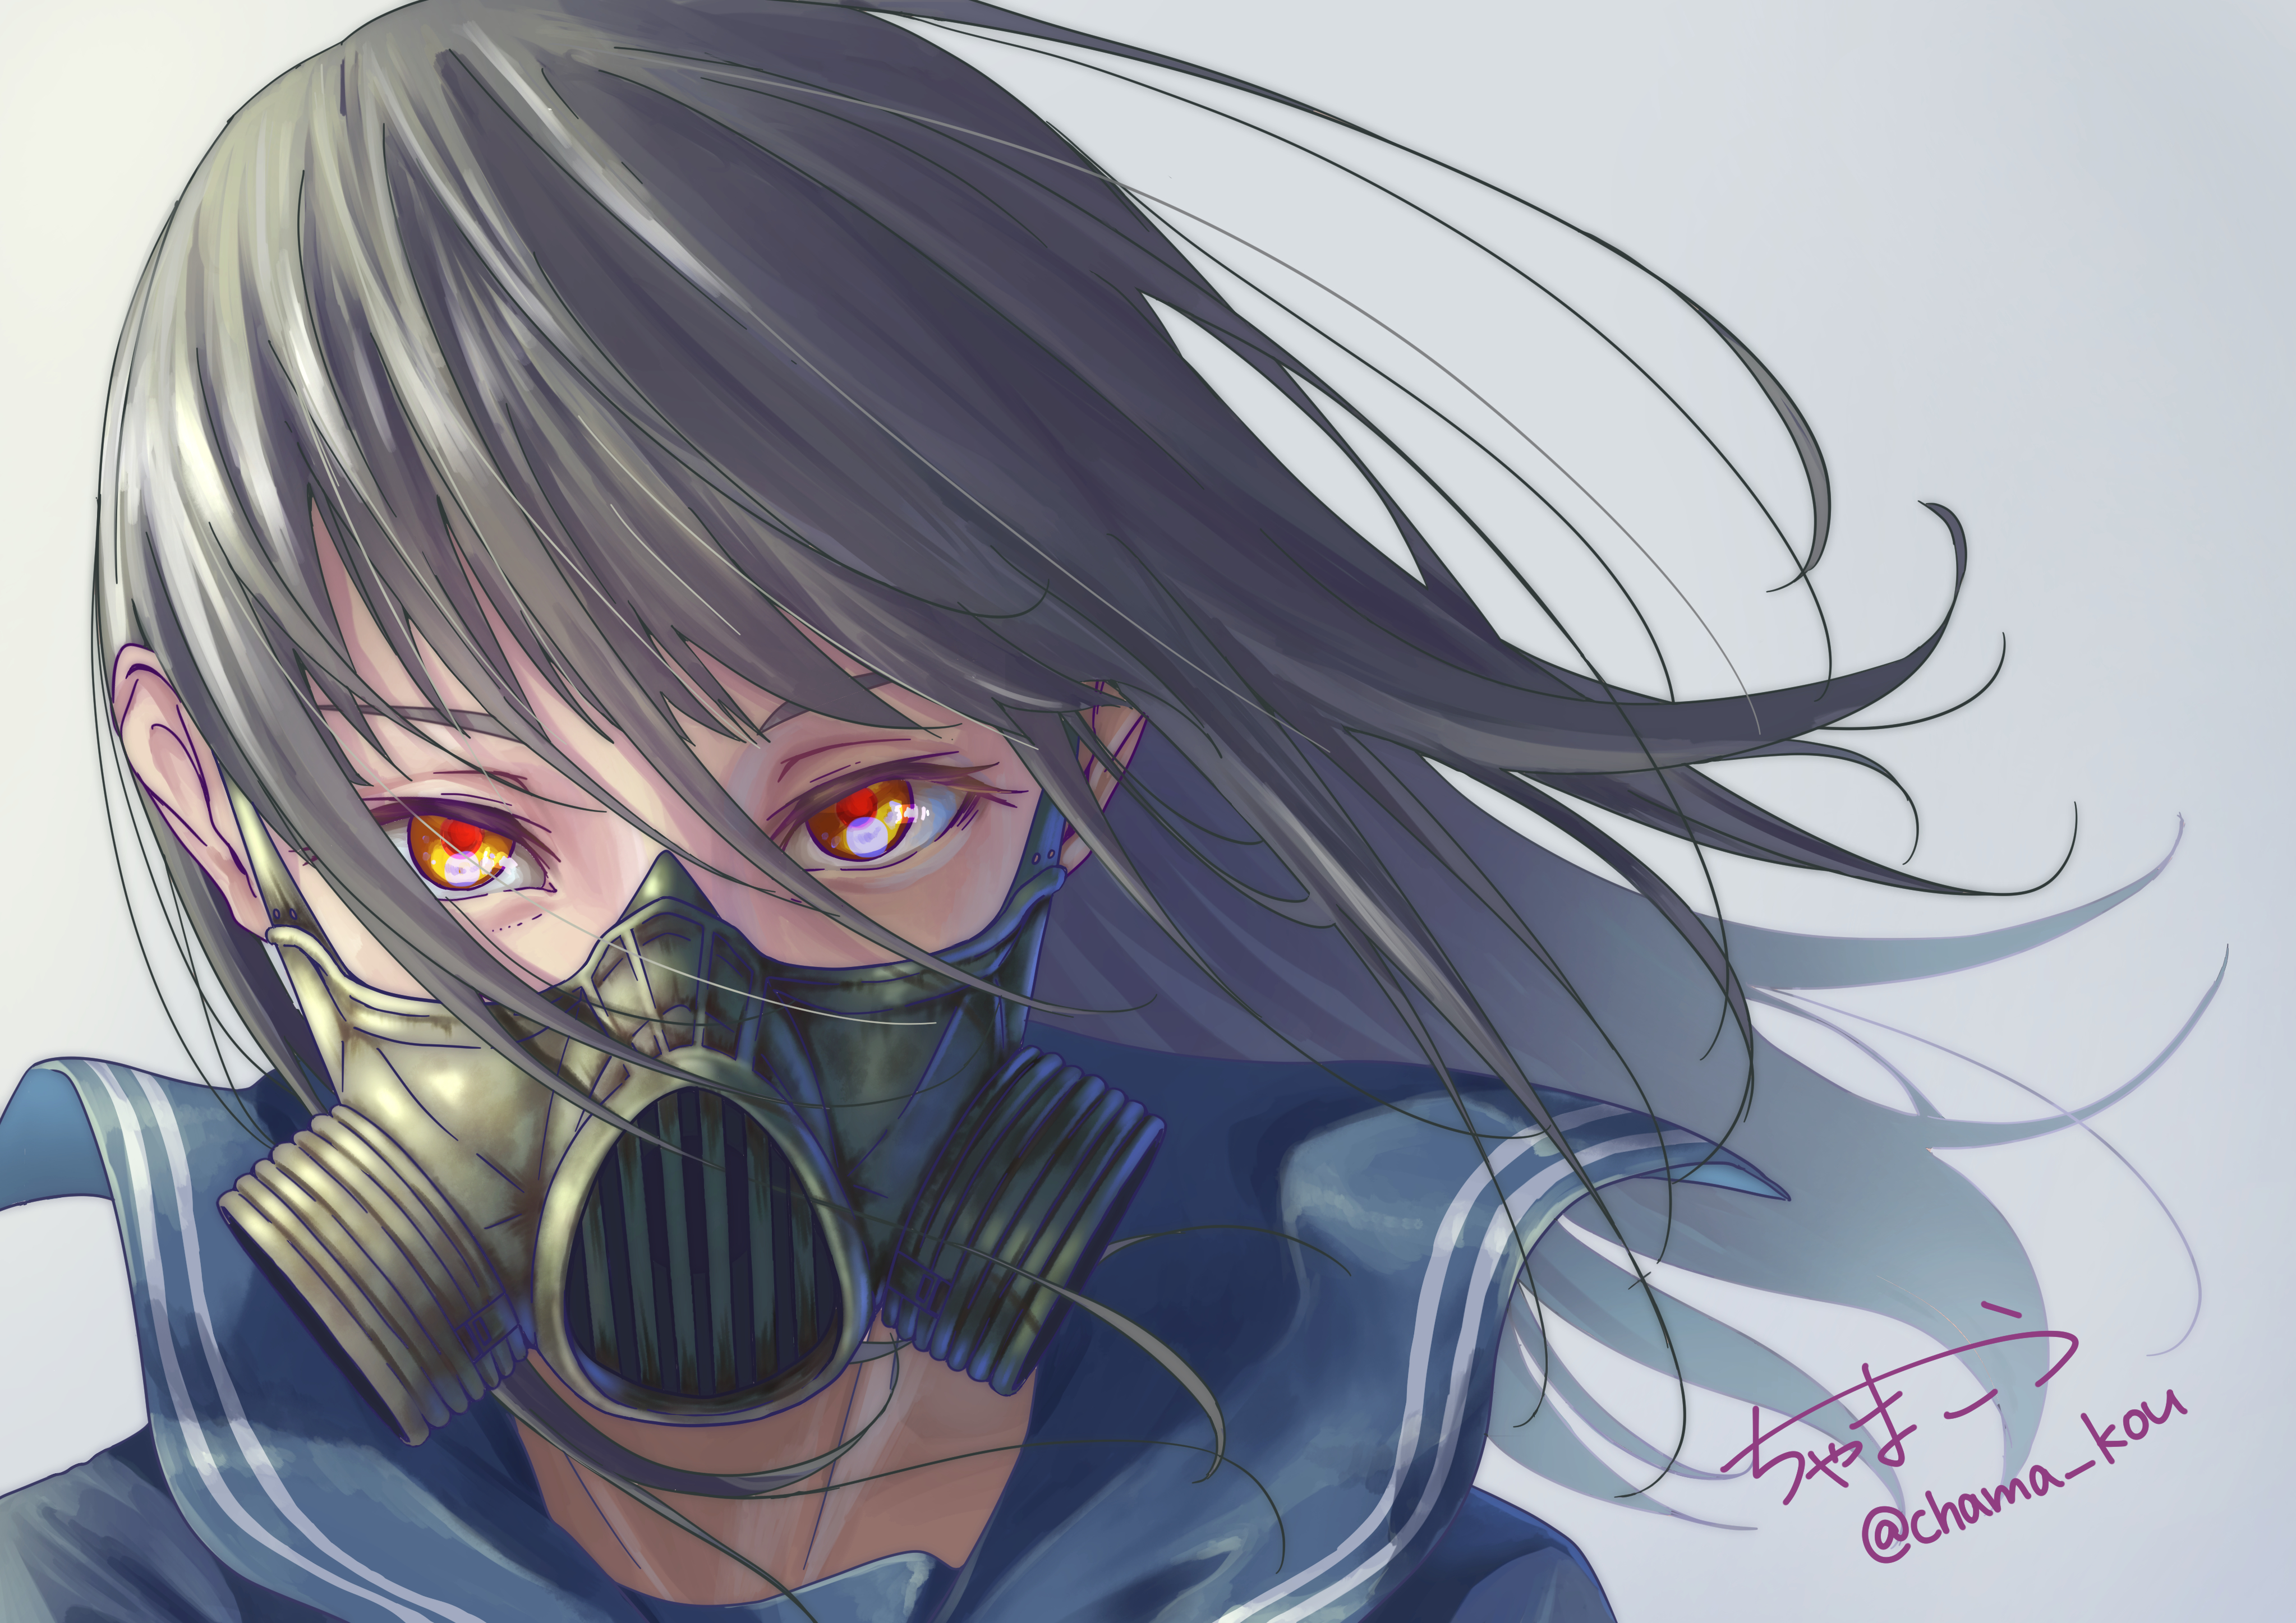 Magical Destroyers Previews Gas Mask-Wearing Pink in New Trailer